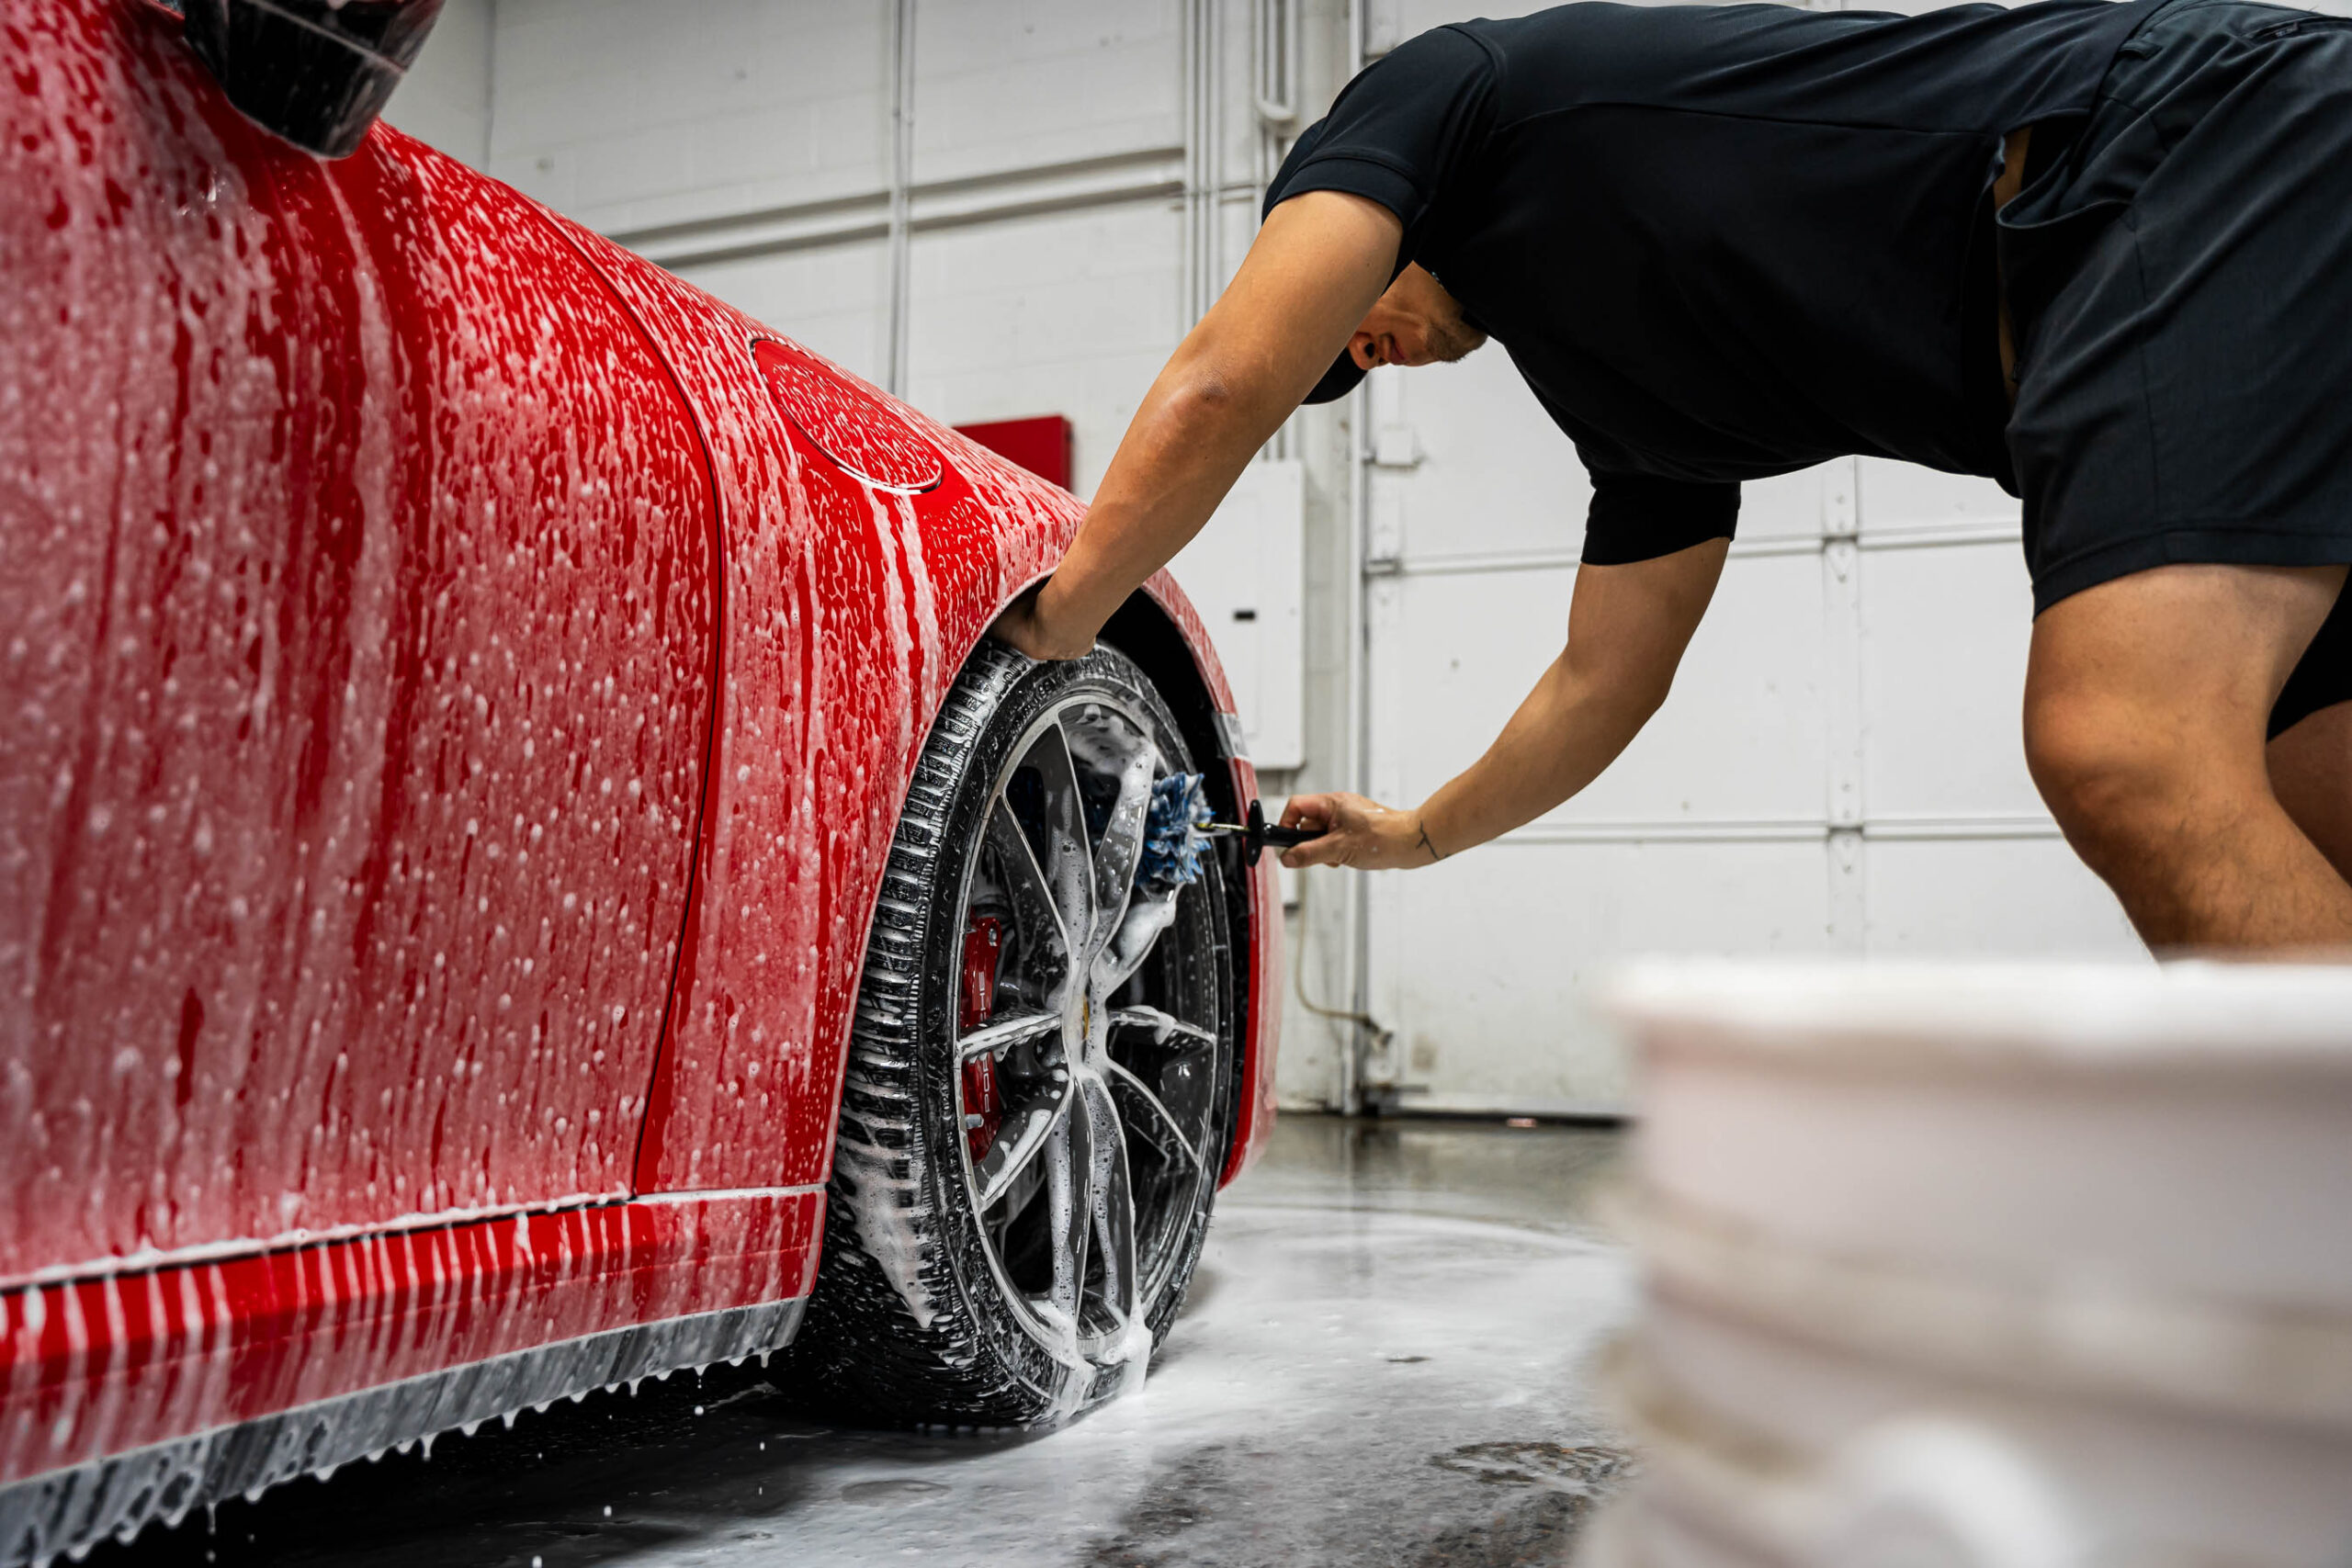 Using specialized brush to clean wheels